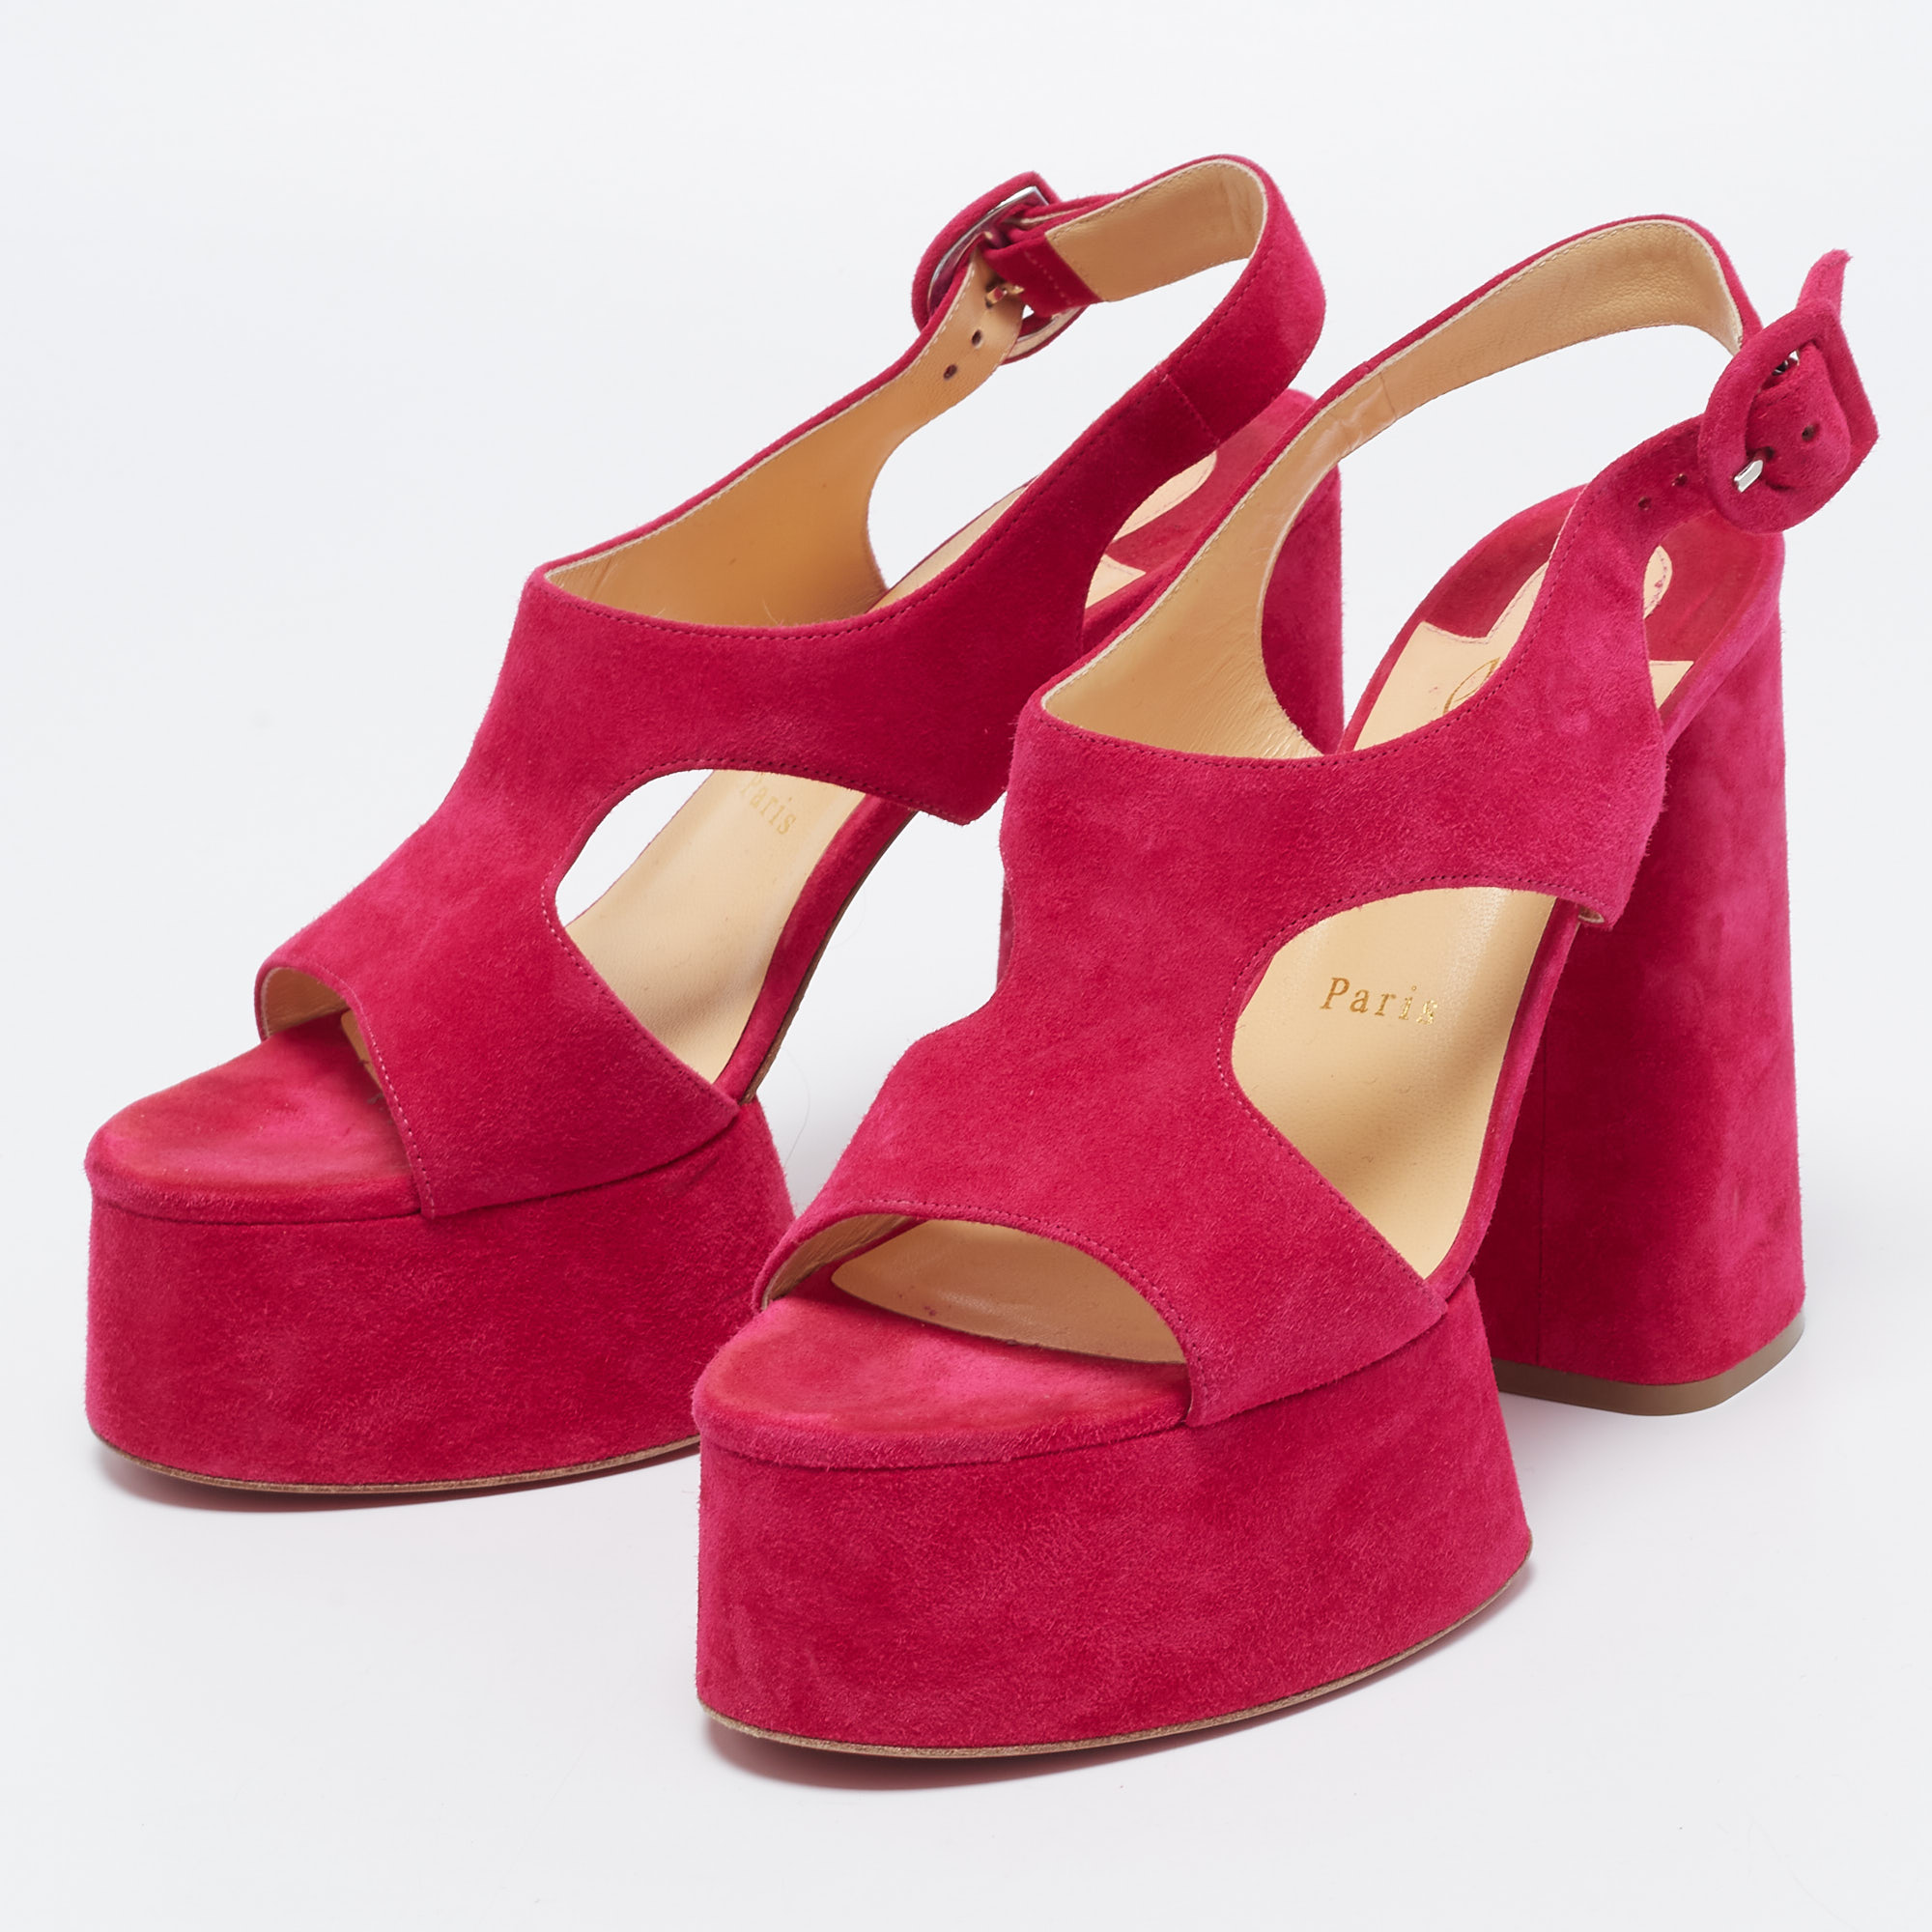 

Christian Louboutin Pink Suede Foolish Sandals Size